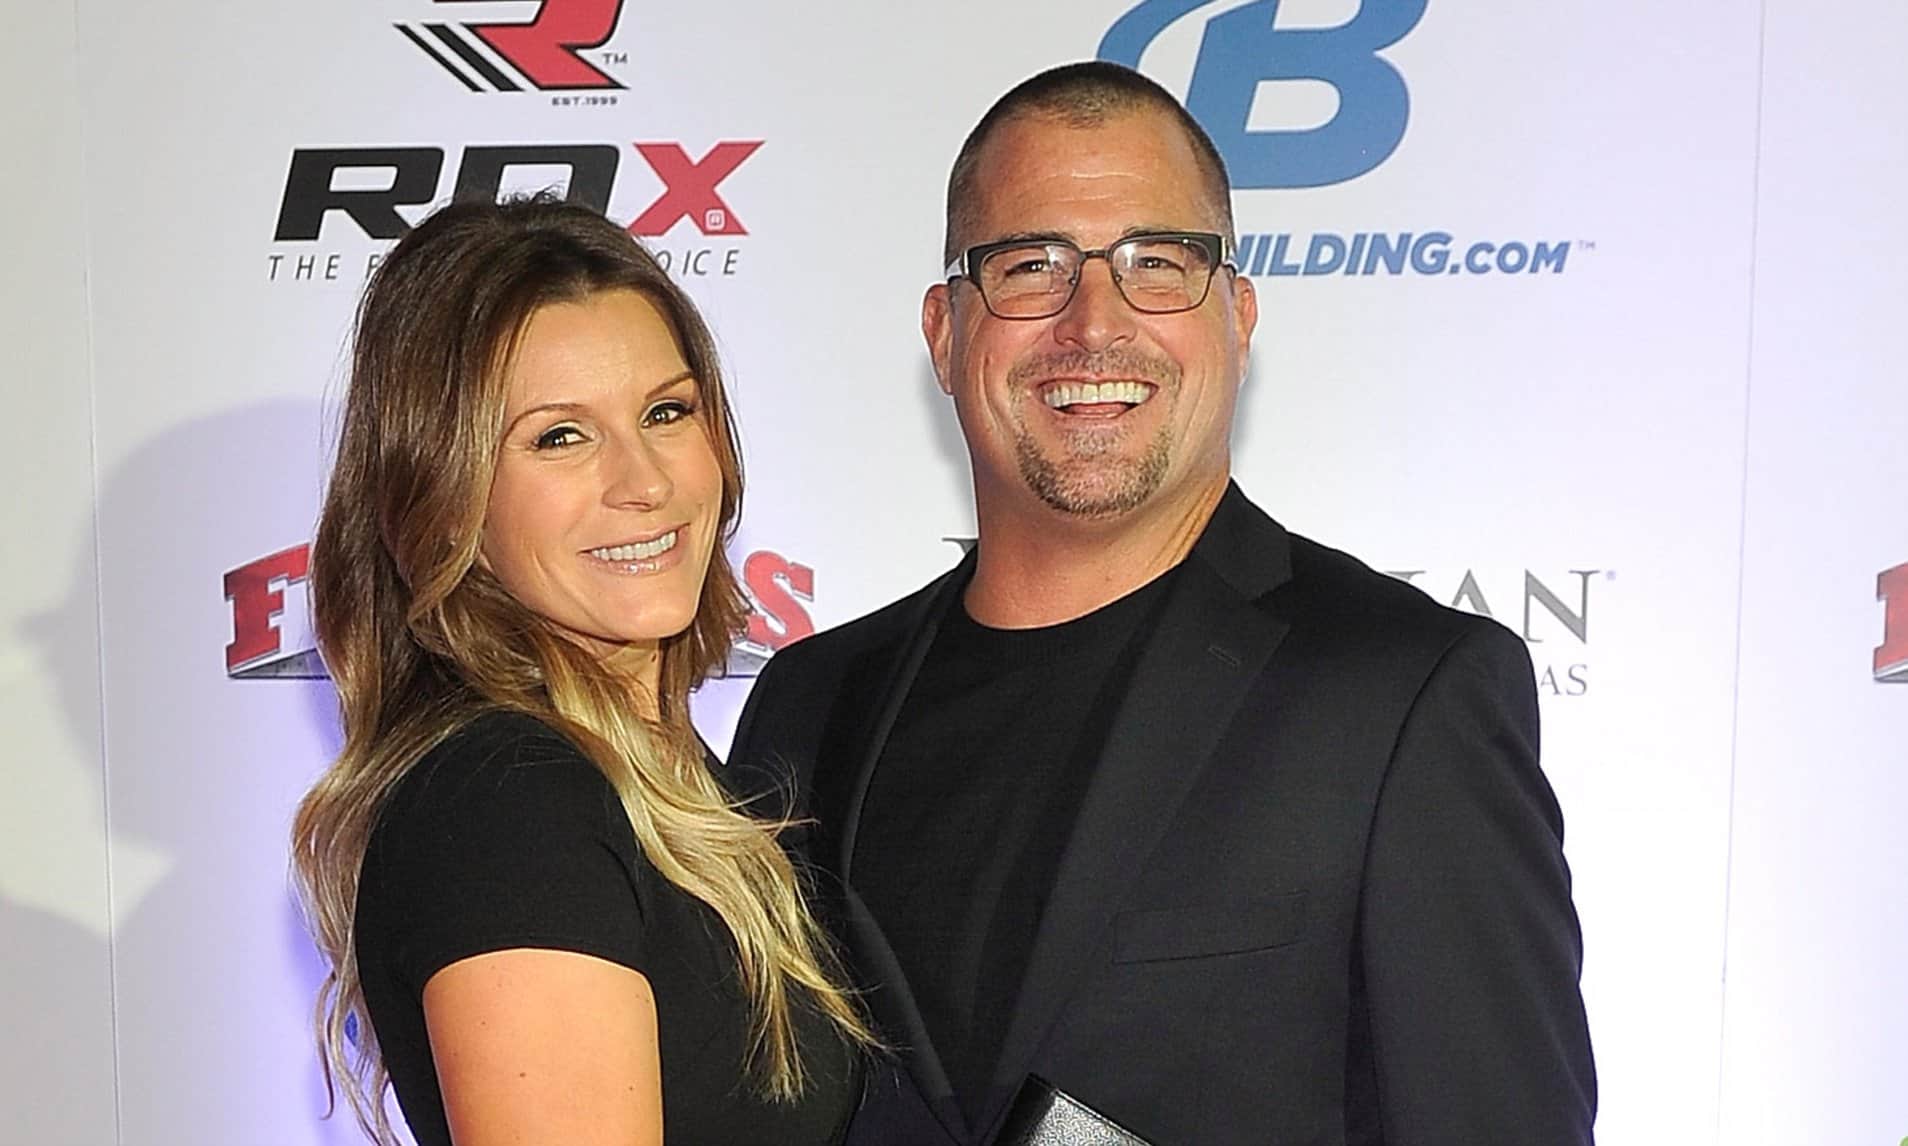 George Eads (right) with ex wife Monika Casey (left)